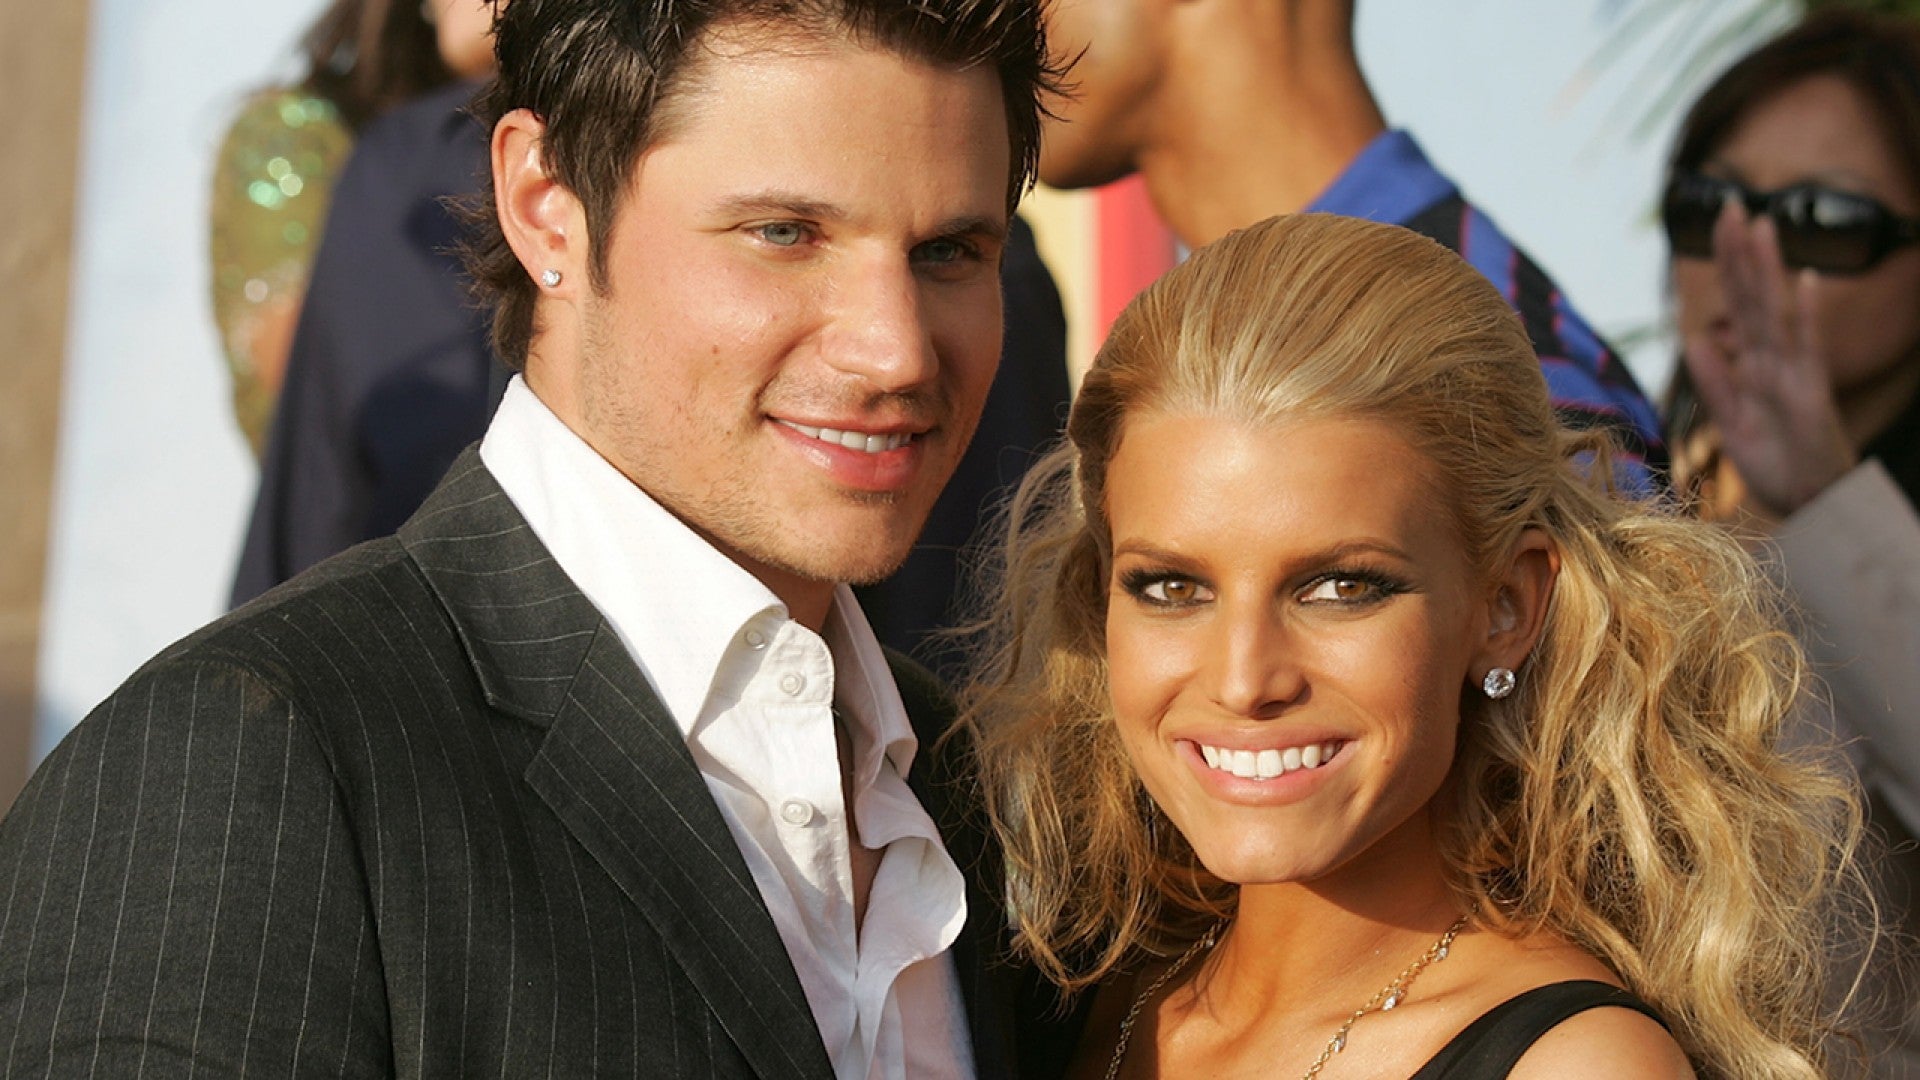 Jessica Simpson Says Marriage to Nick Lachey Was Her Biggest Money Mistake